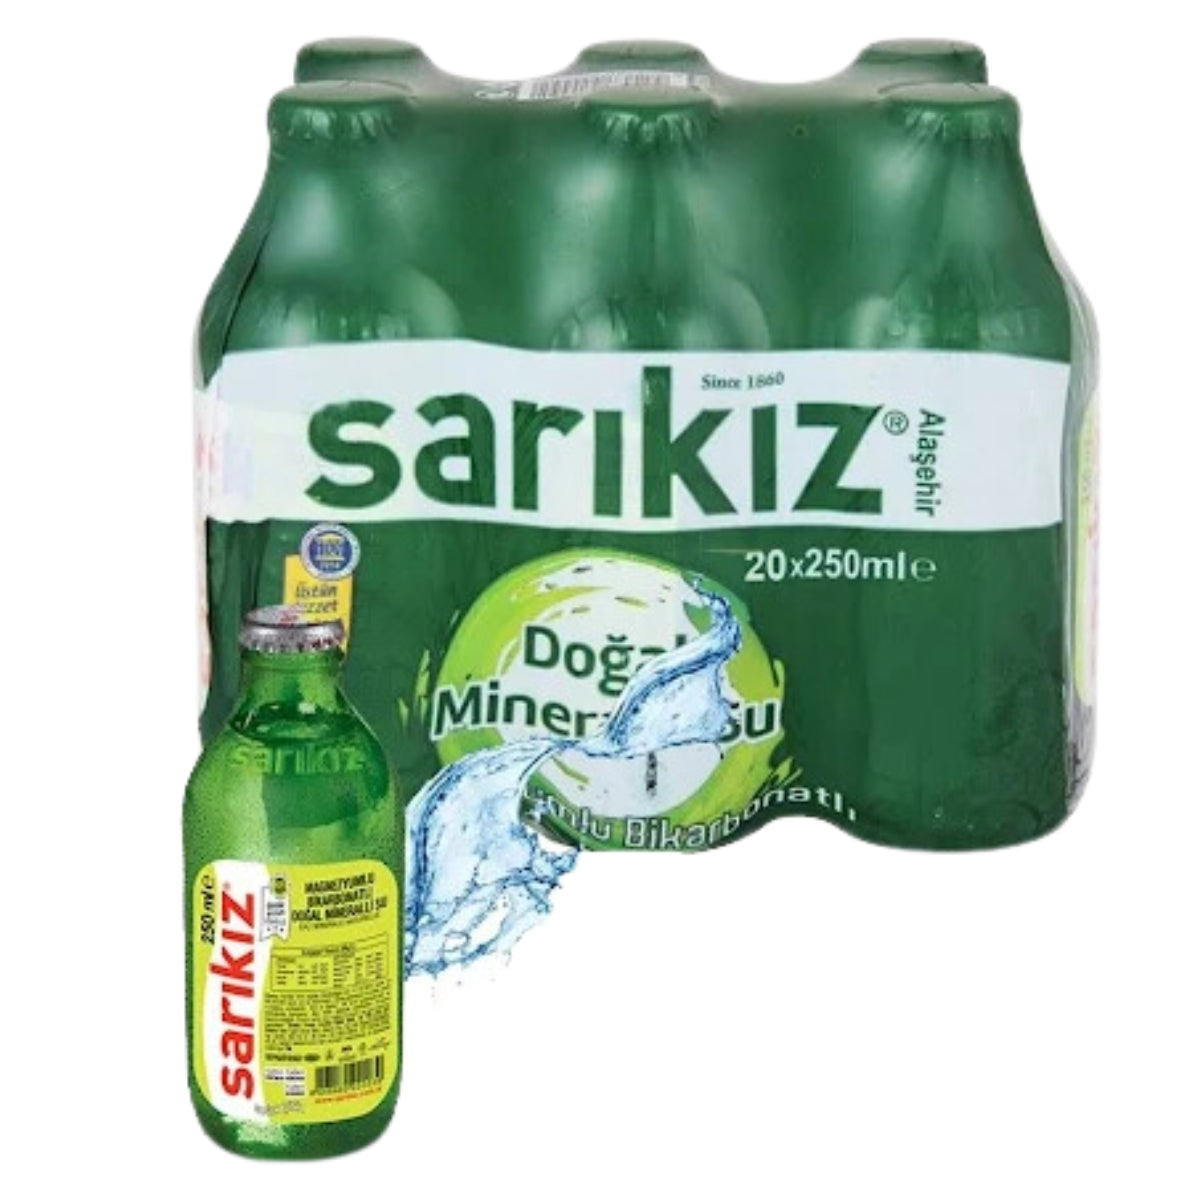 A pack of six Sarikiz - Sparkling Mineral Water - 6 x 250g bottles.